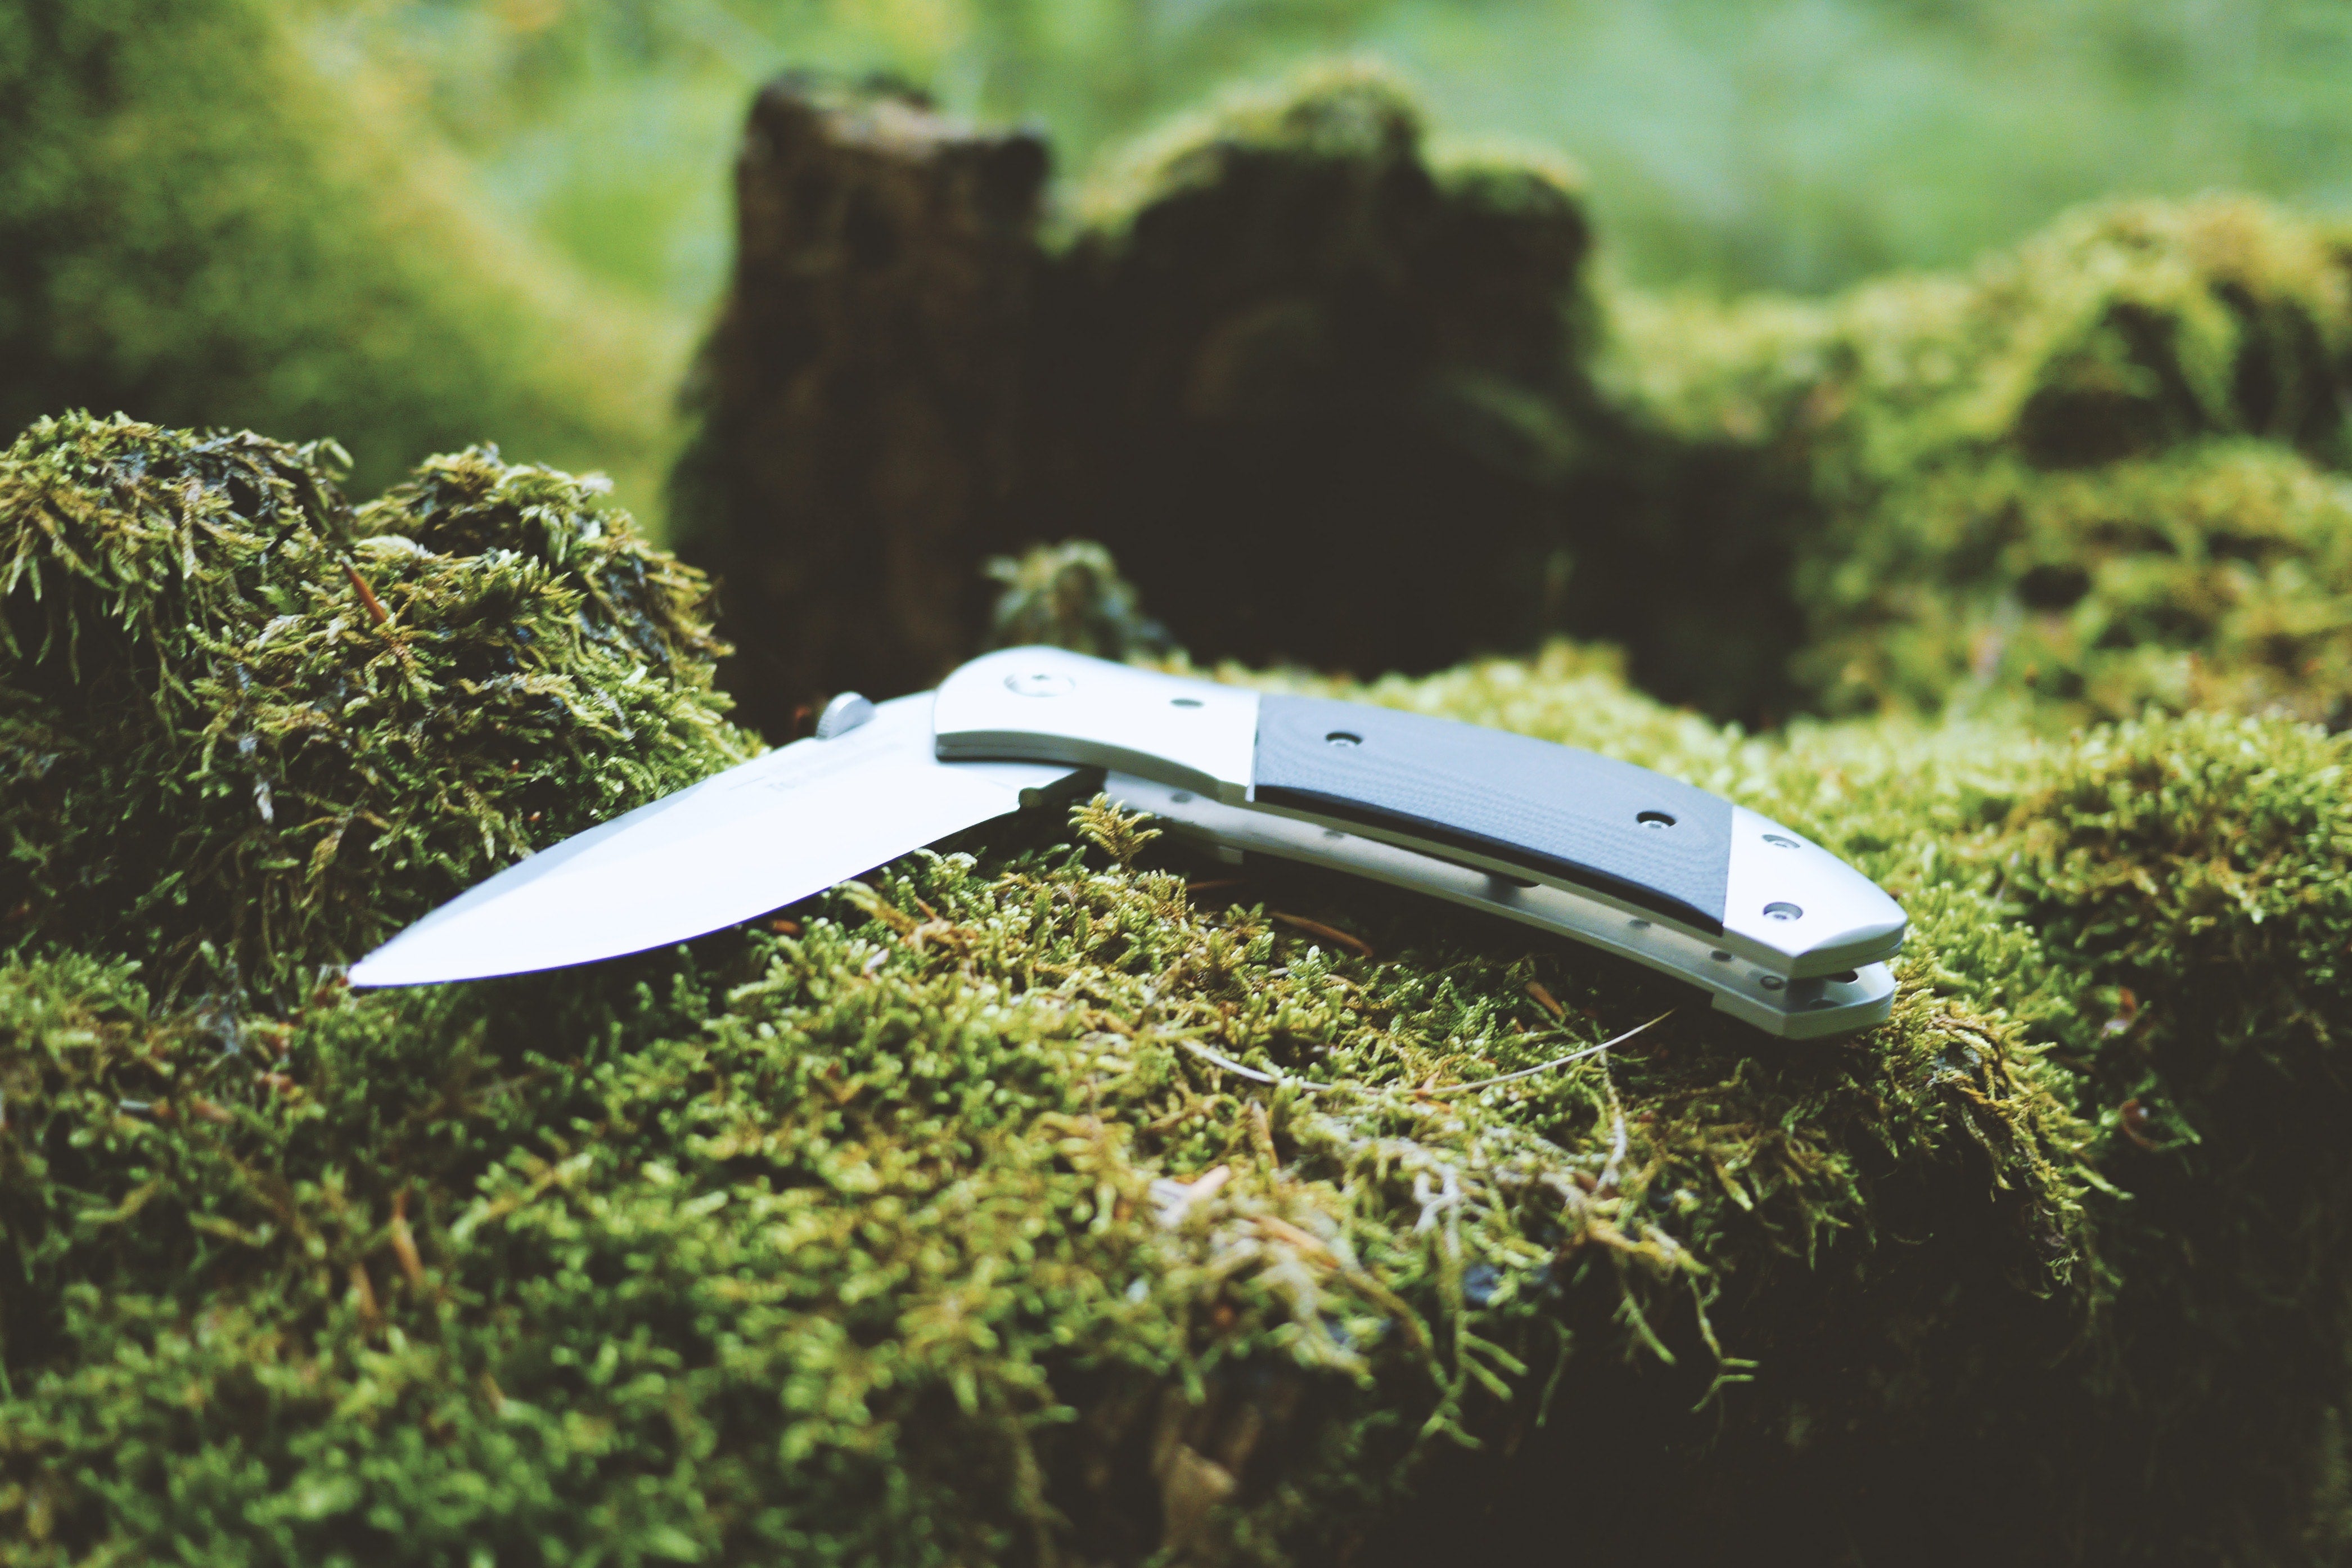 Knife Aid’s Top 10 most iconic practical and utility knives